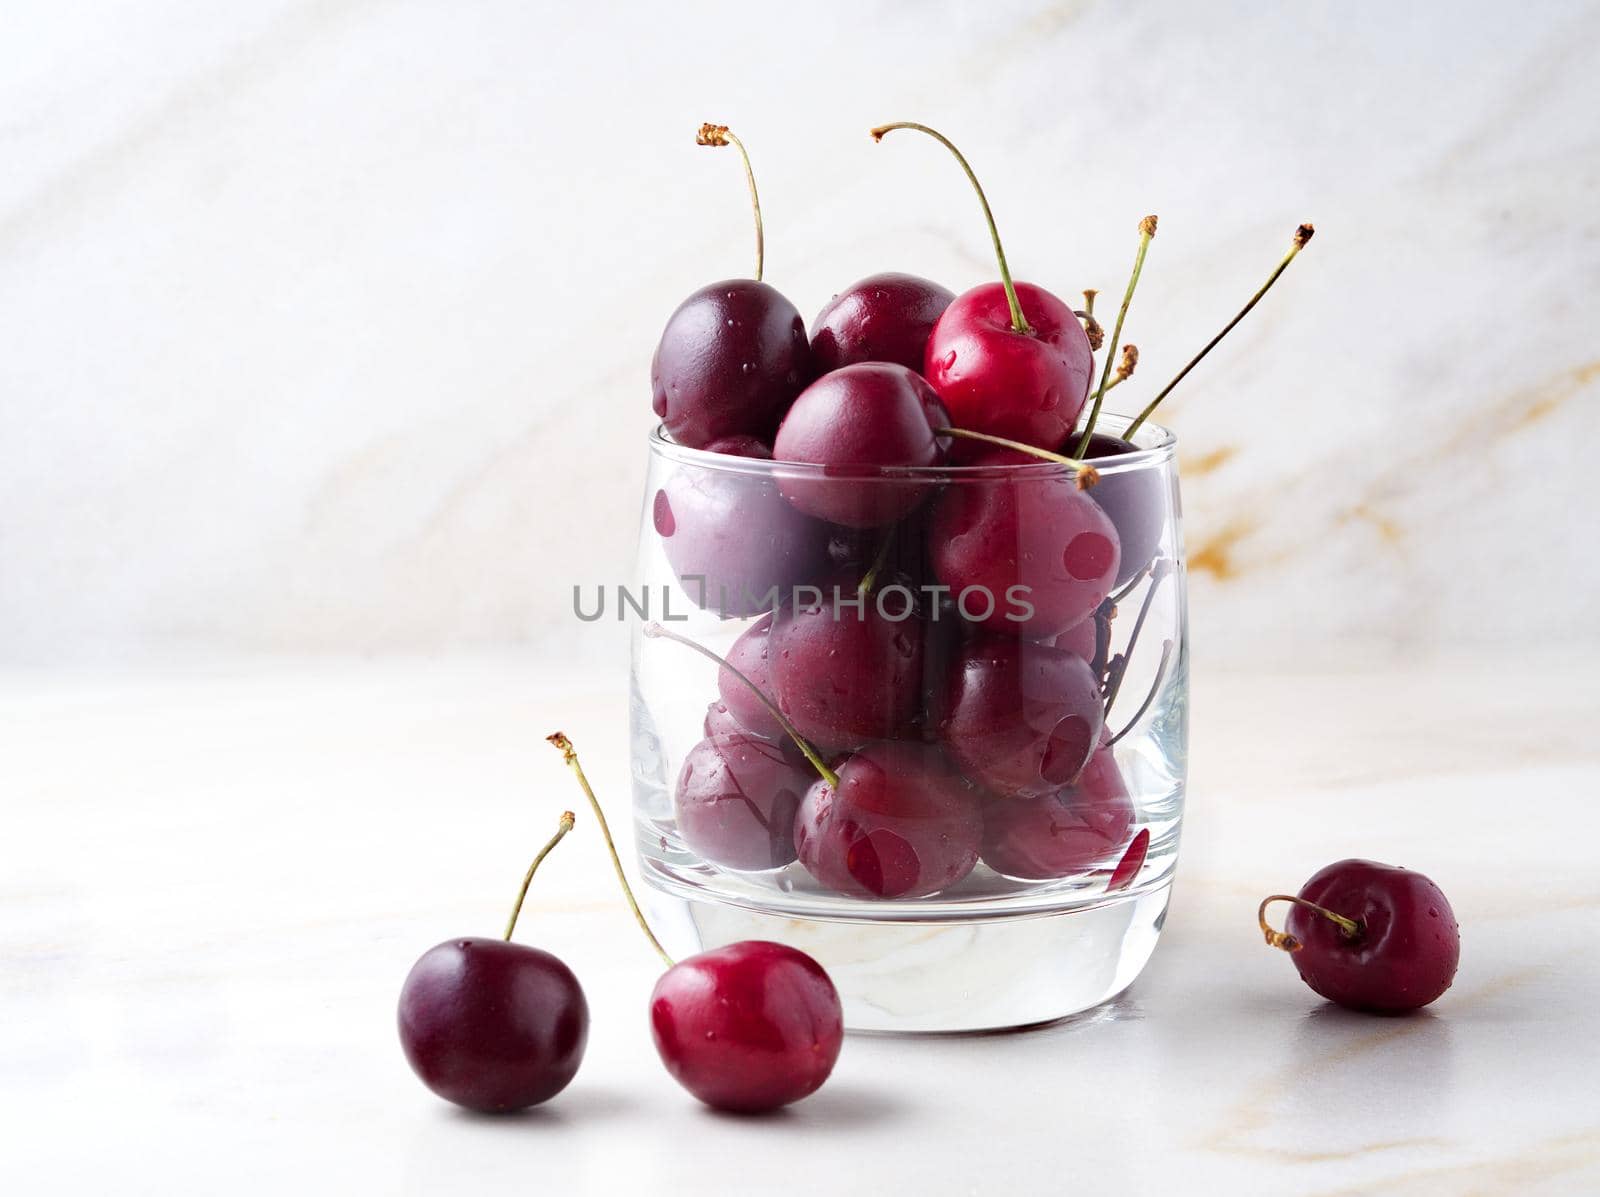 The red dark sweet cherries in glass on stone white table, side view, copy space